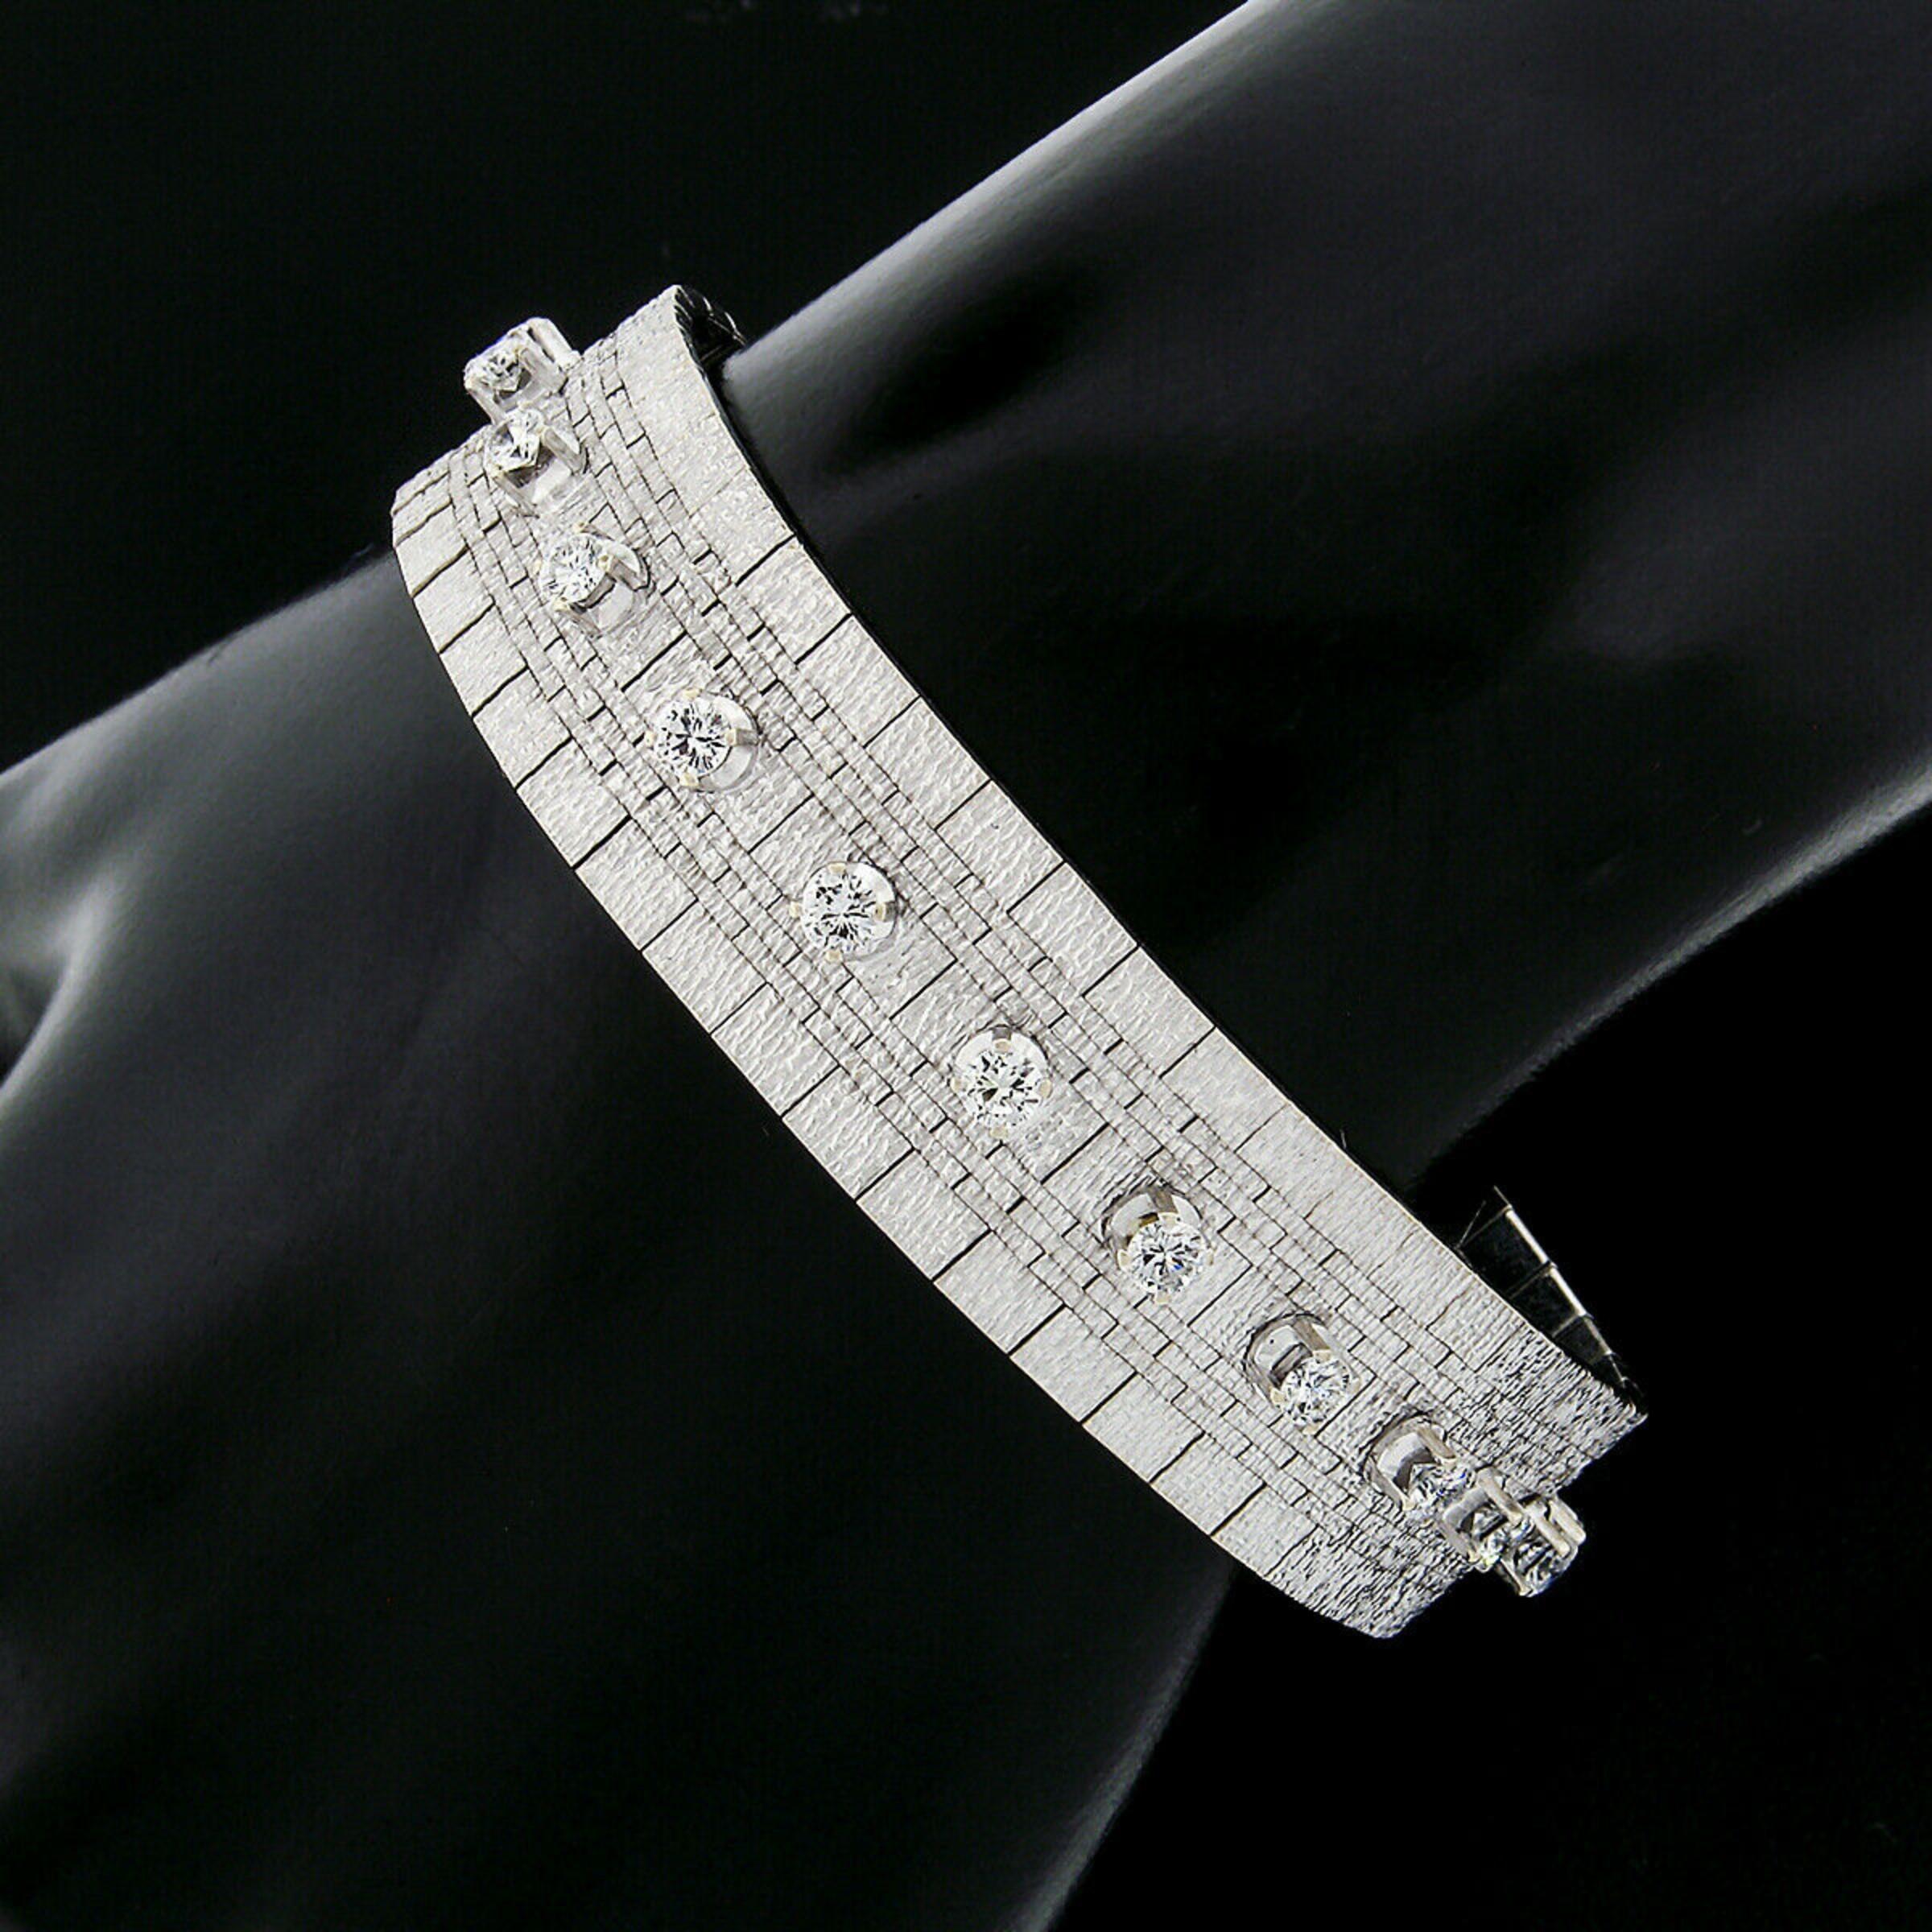 This outstanding vintage bracelet was crafted from solid 18k white gold and features a line of 22 prong set round brilliant cut diamonds. The bracelet is constructed from textured links assembled into an intricate brick pattern. The links flow